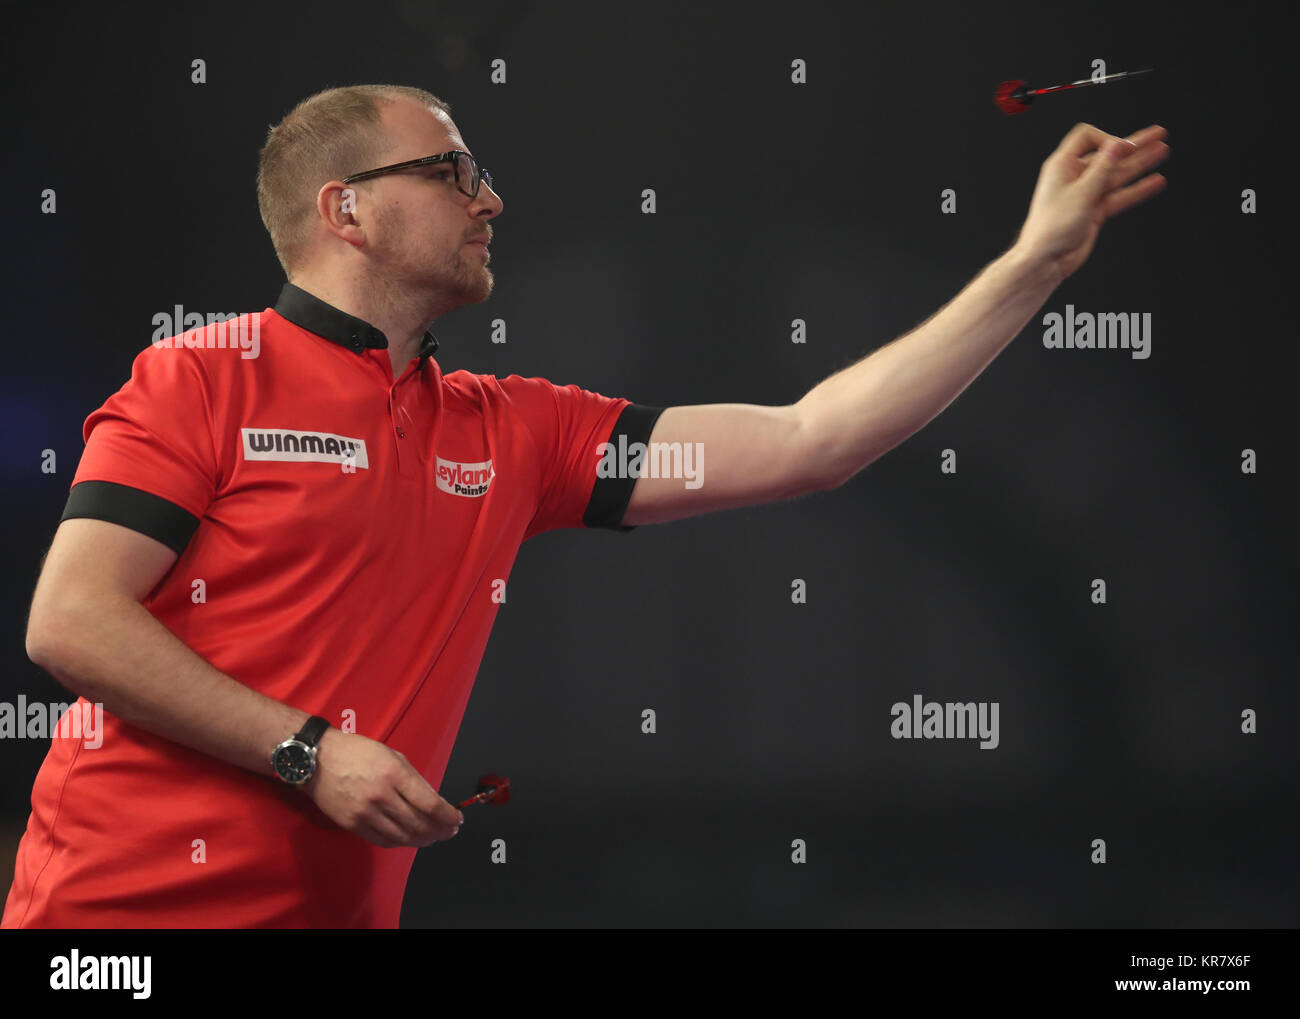 Mark Webster during day of the Hill World Darts Championship at Palace, London Photo - Alamy